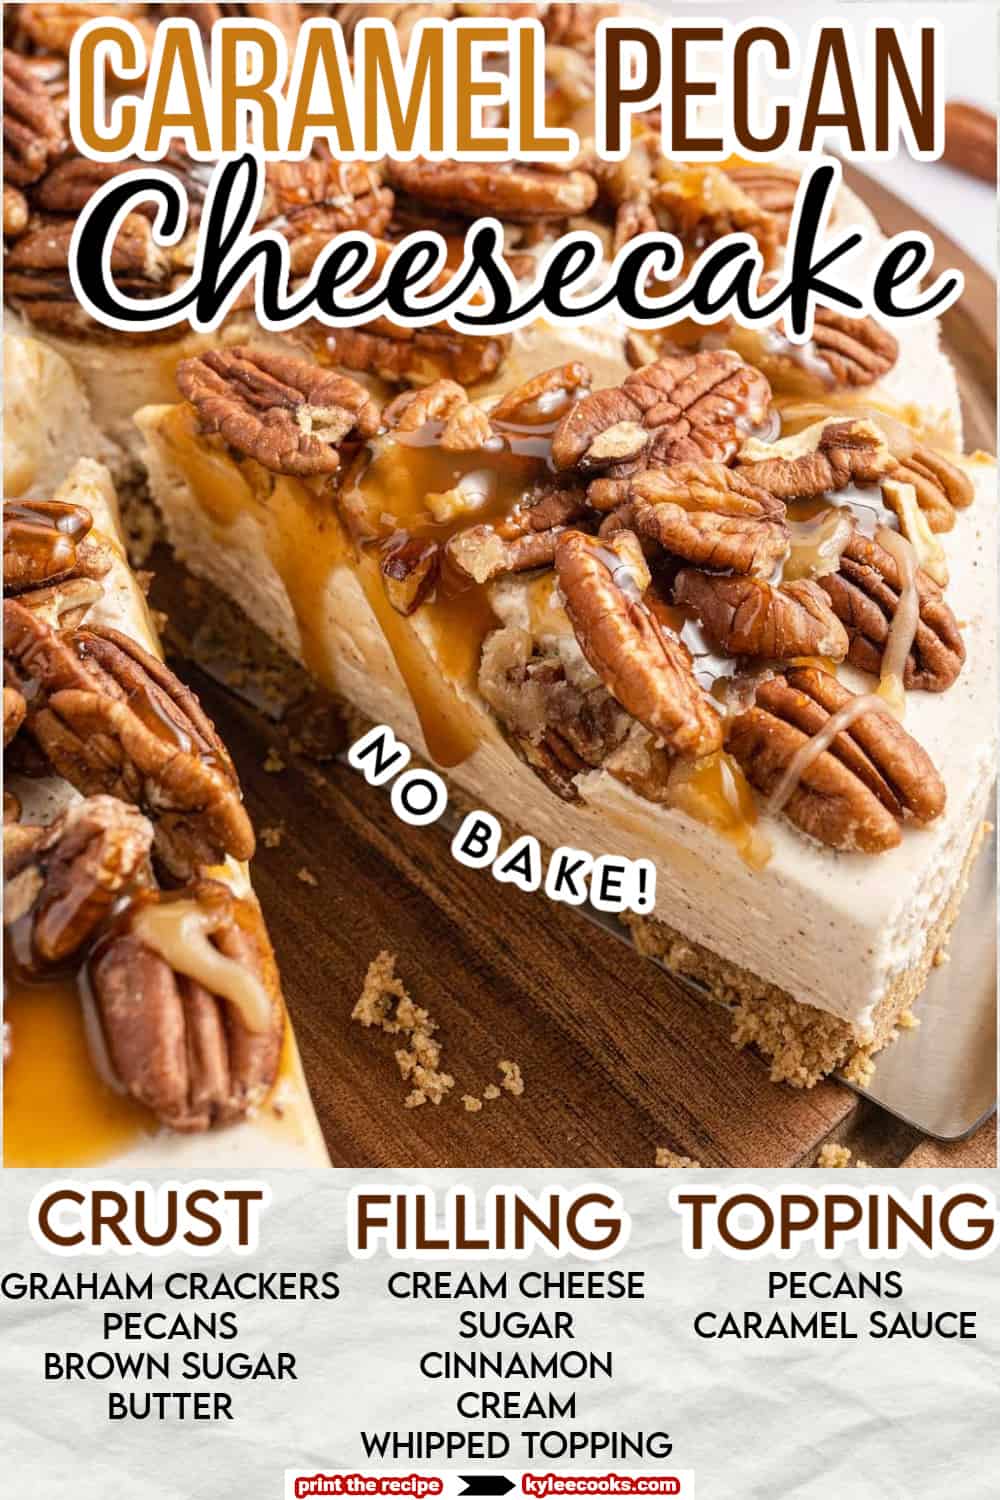 caramel pecan cheesecake on a wooden board with recipe name overlaid in text.